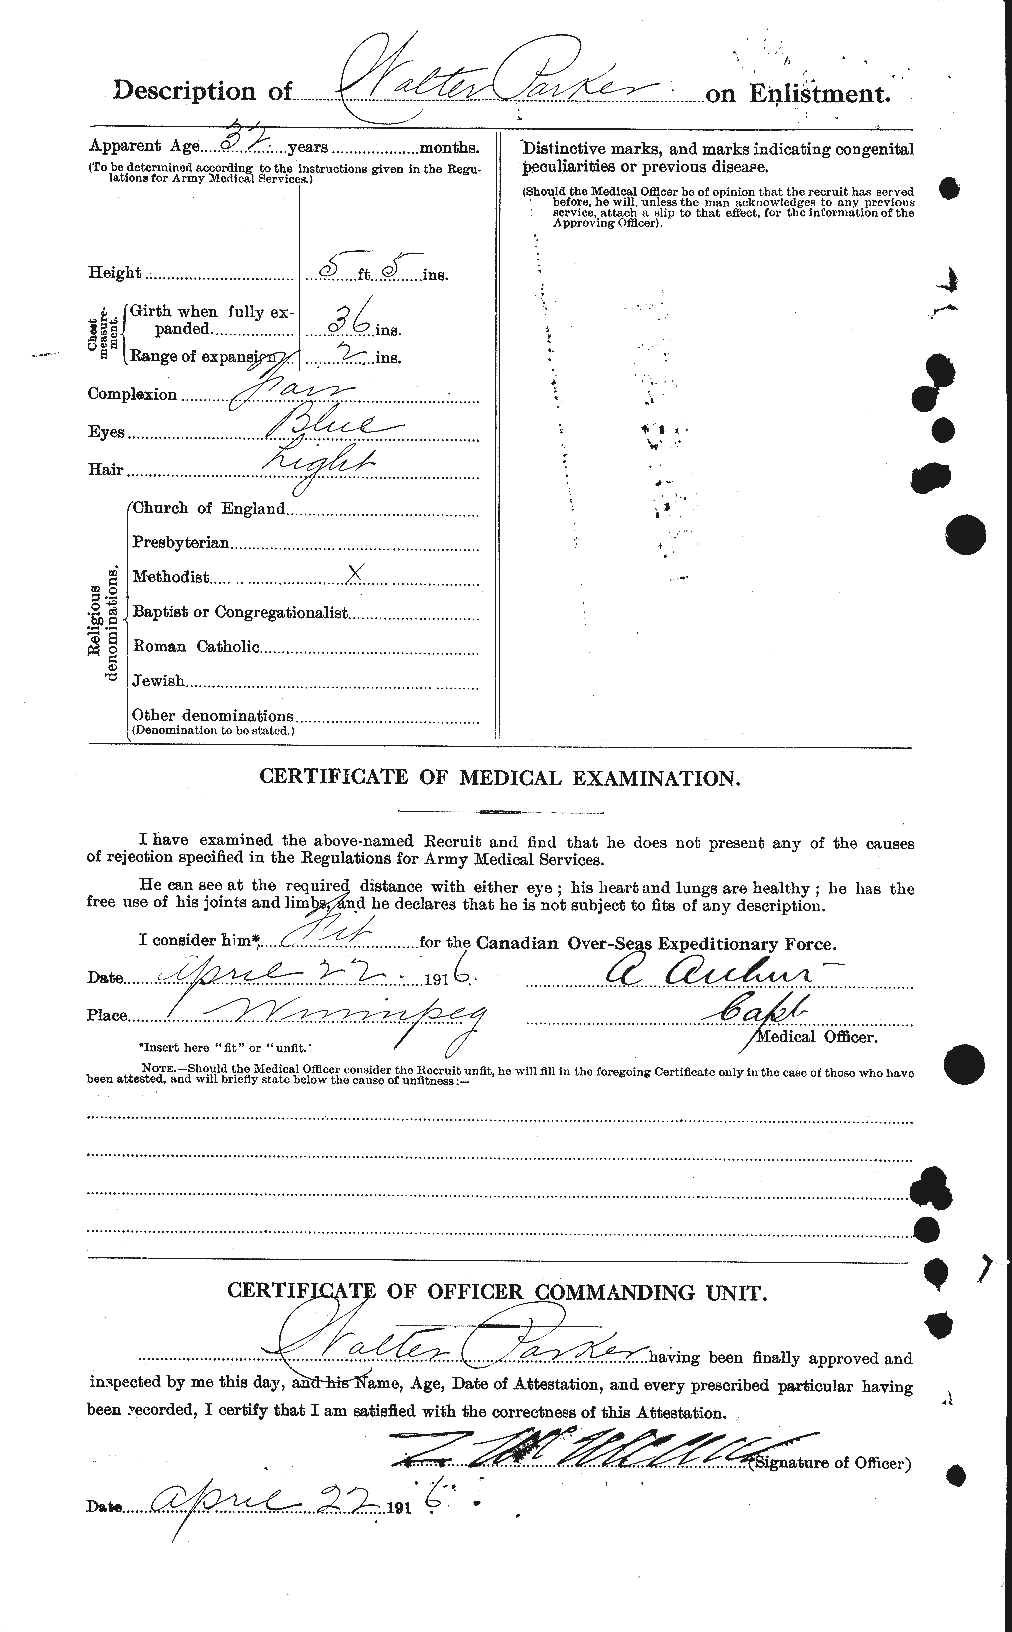 Personnel Records of the First World War - CEF 565686b